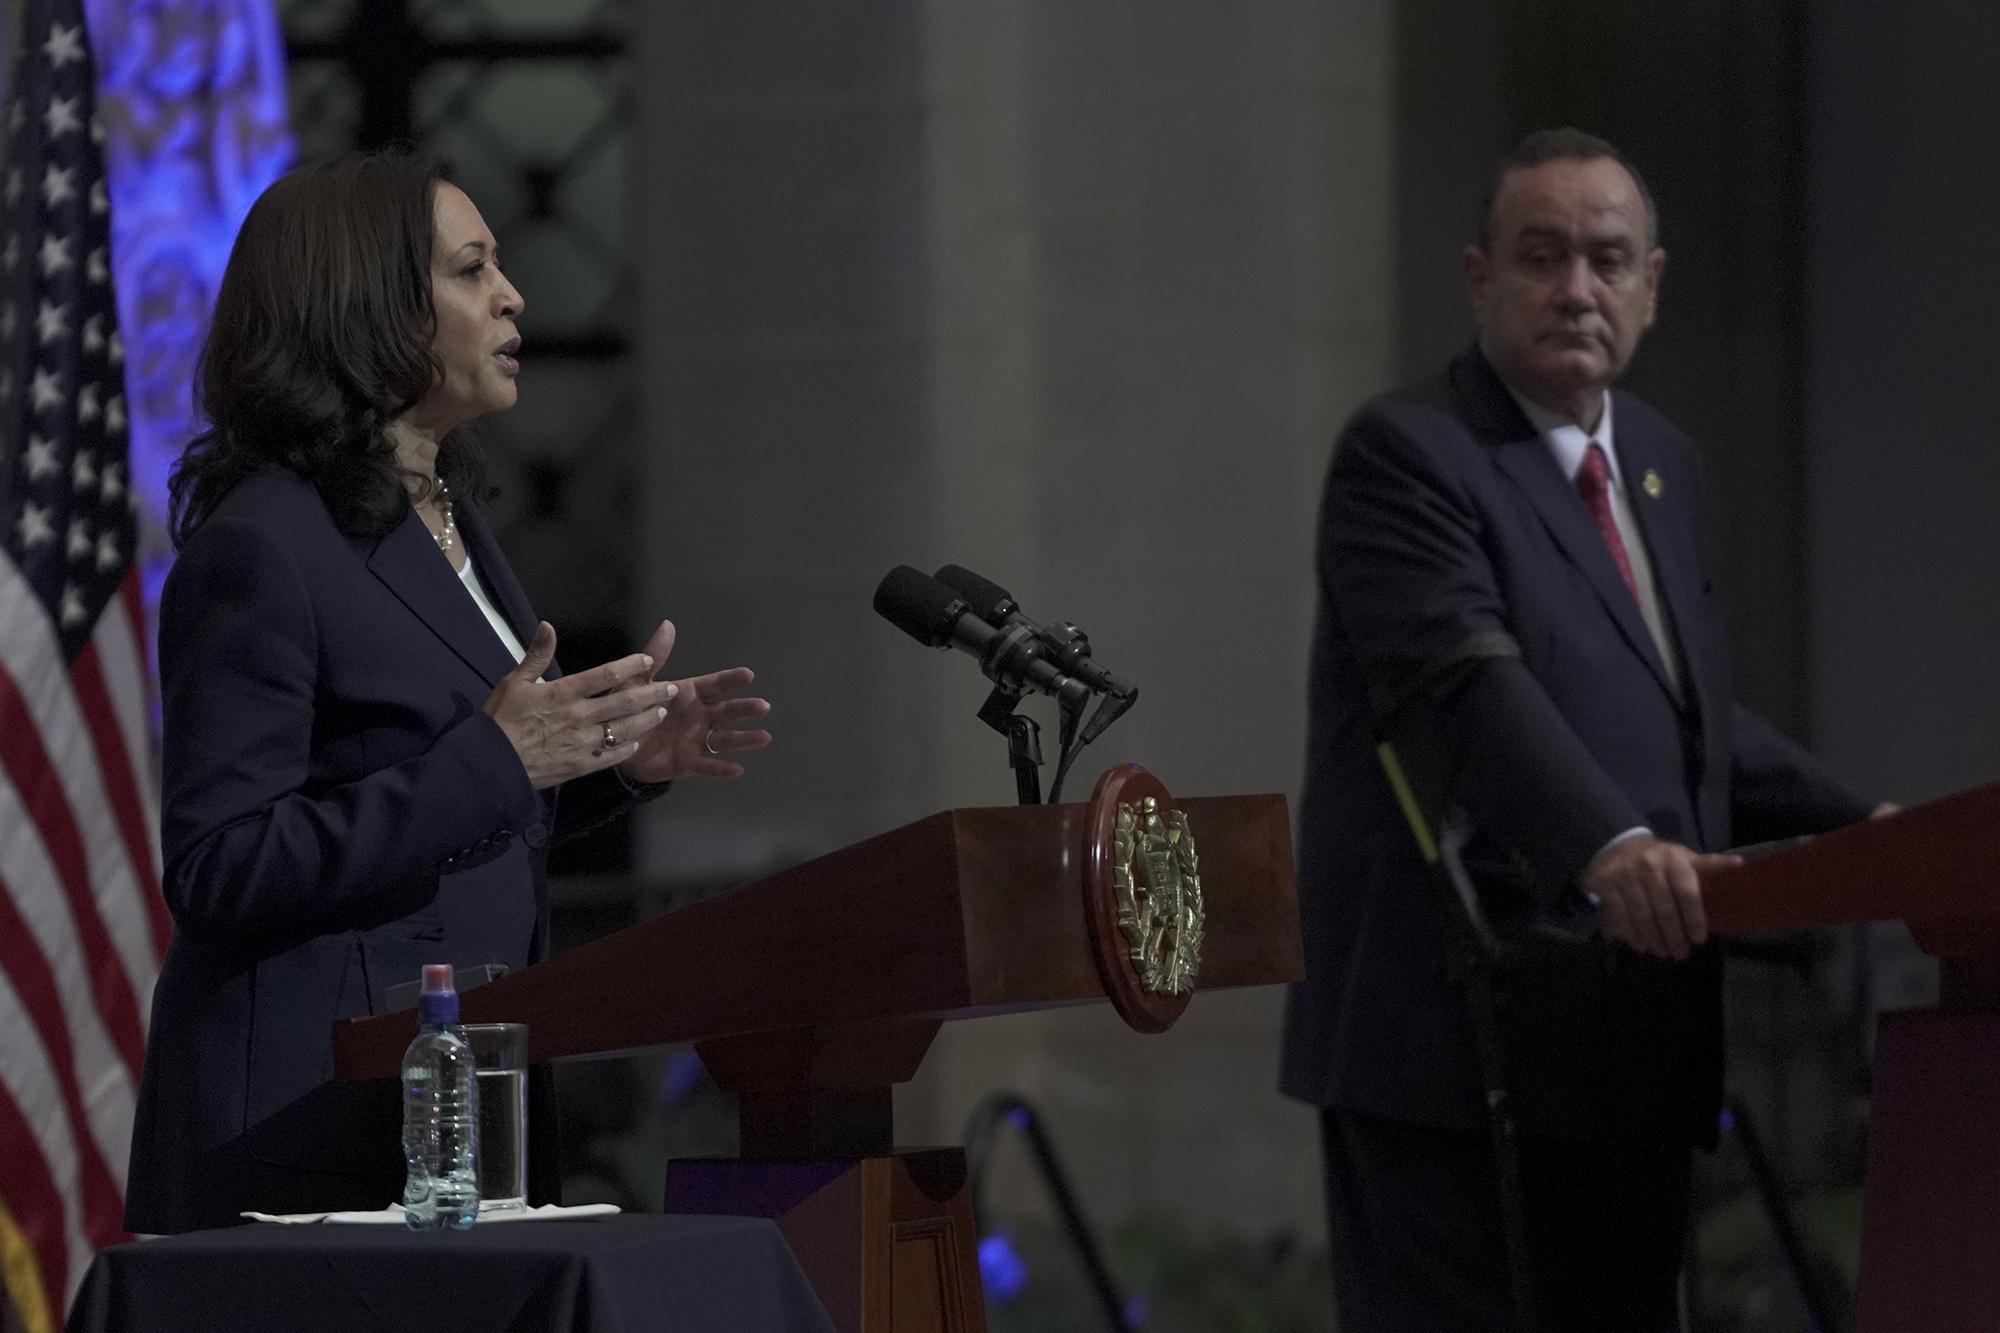 "Do not come," Vice President Kamala Harris told prospective Central American migrants contemplating traveling without papers to the United States. Harris traveled to Guatemala in June 2021 to discuss migration, foreign investment, and other bilateral priorities with the administration of Alejandro Giammattei. Photo: Víctor Peña/El Faro